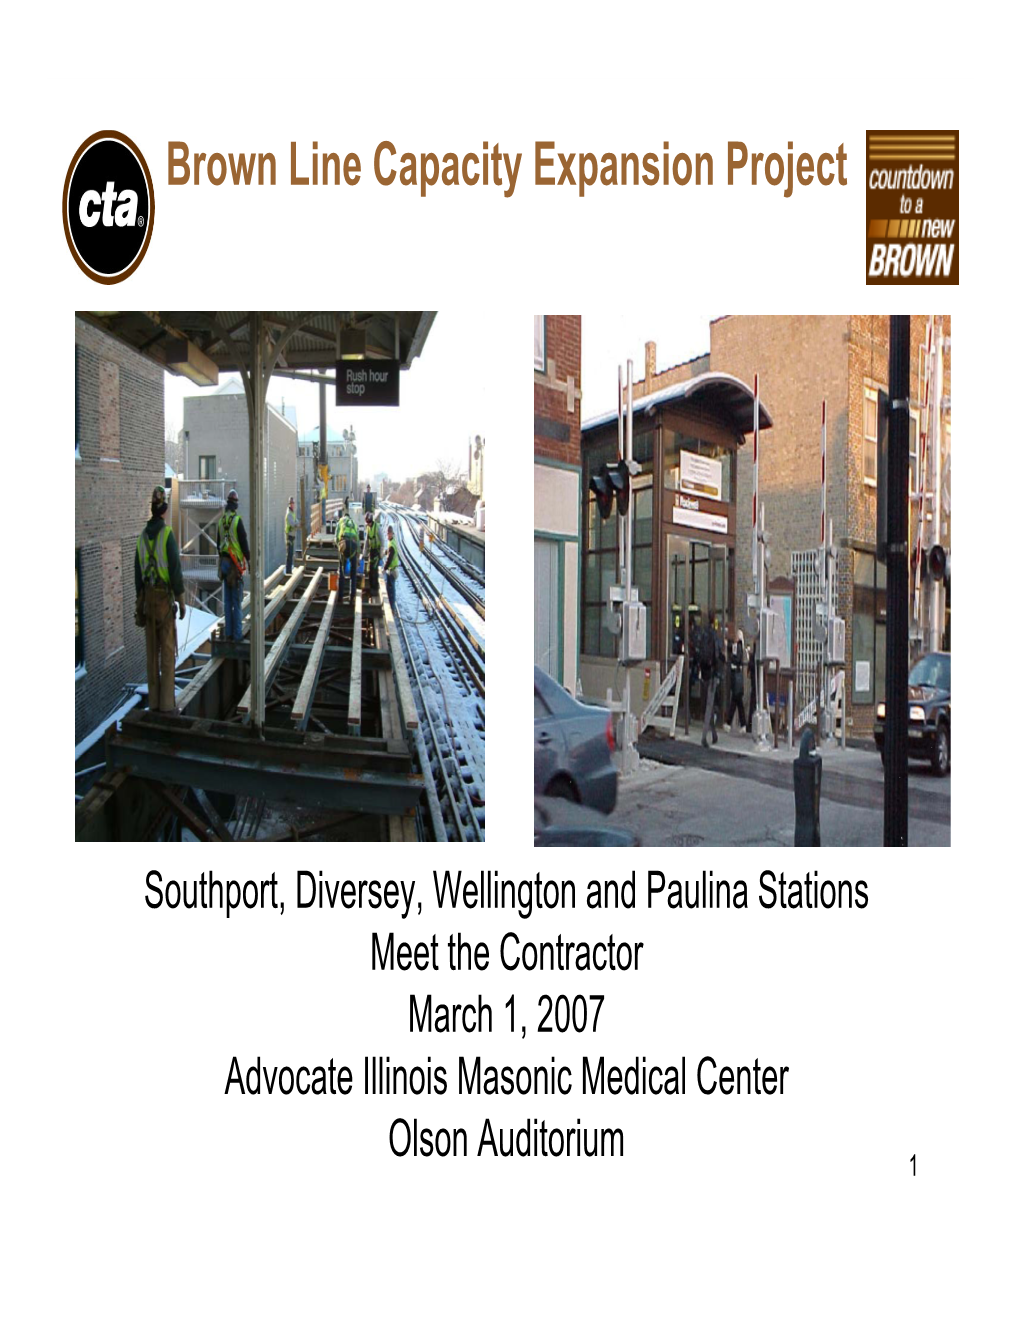 Brown Line Capacity Expansion Project Agenda